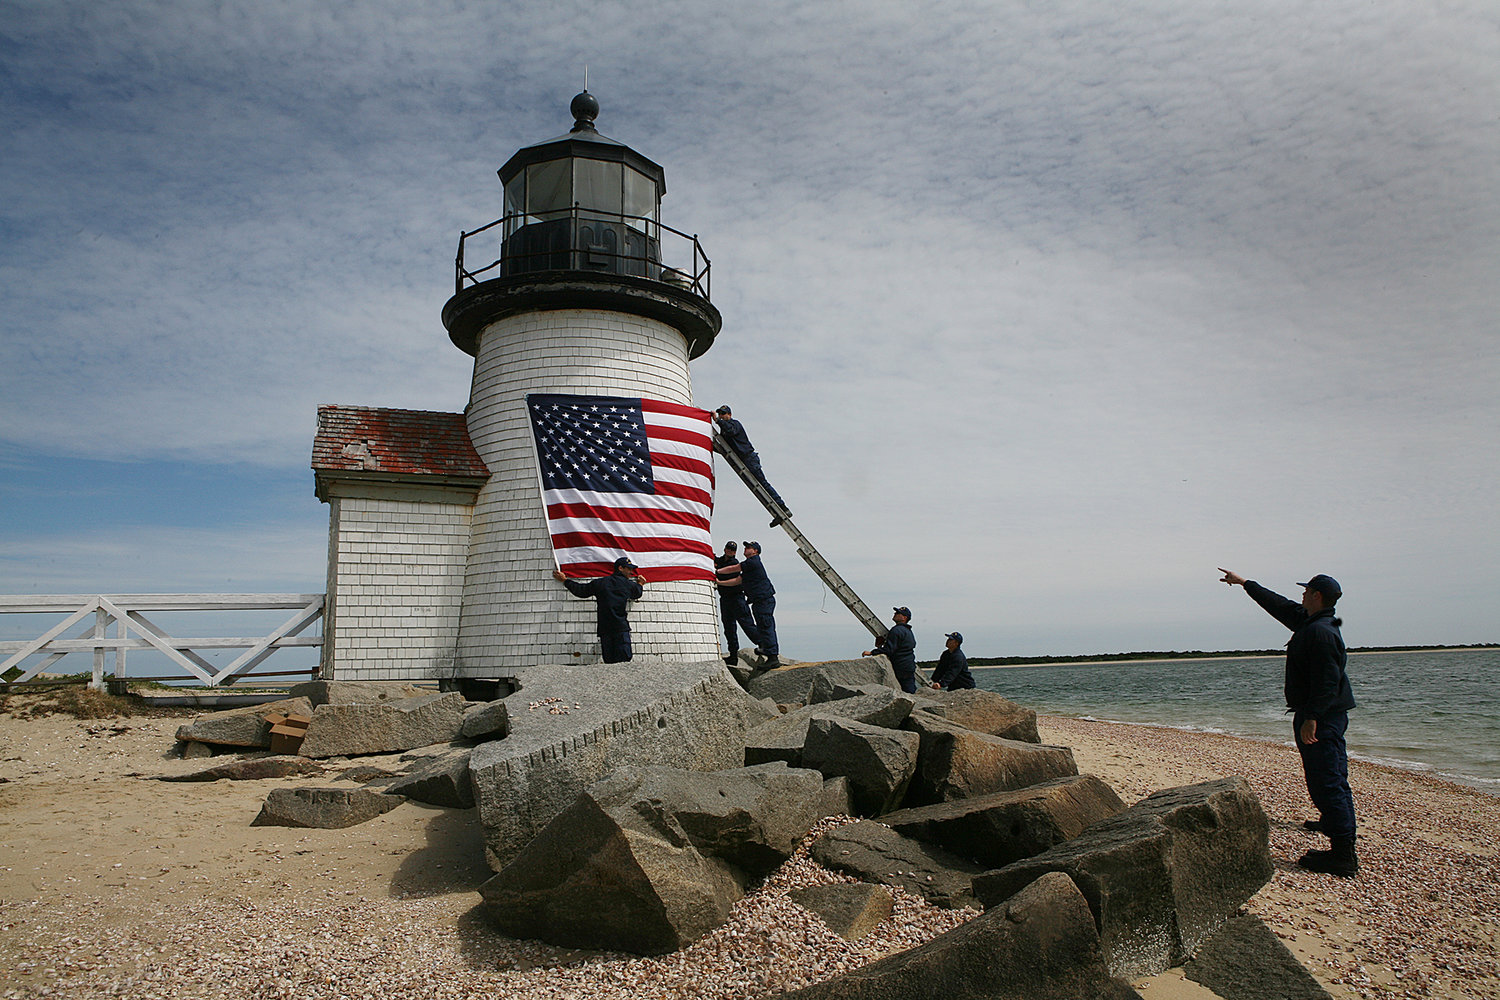 MAY 28, 2021 -- A crew from the US Coast Guard Station Brant Point takes down the daffodil wreath and puts up a flag in honor of Memorial Day and the Fourth of July at the Brant Point lighthouse.